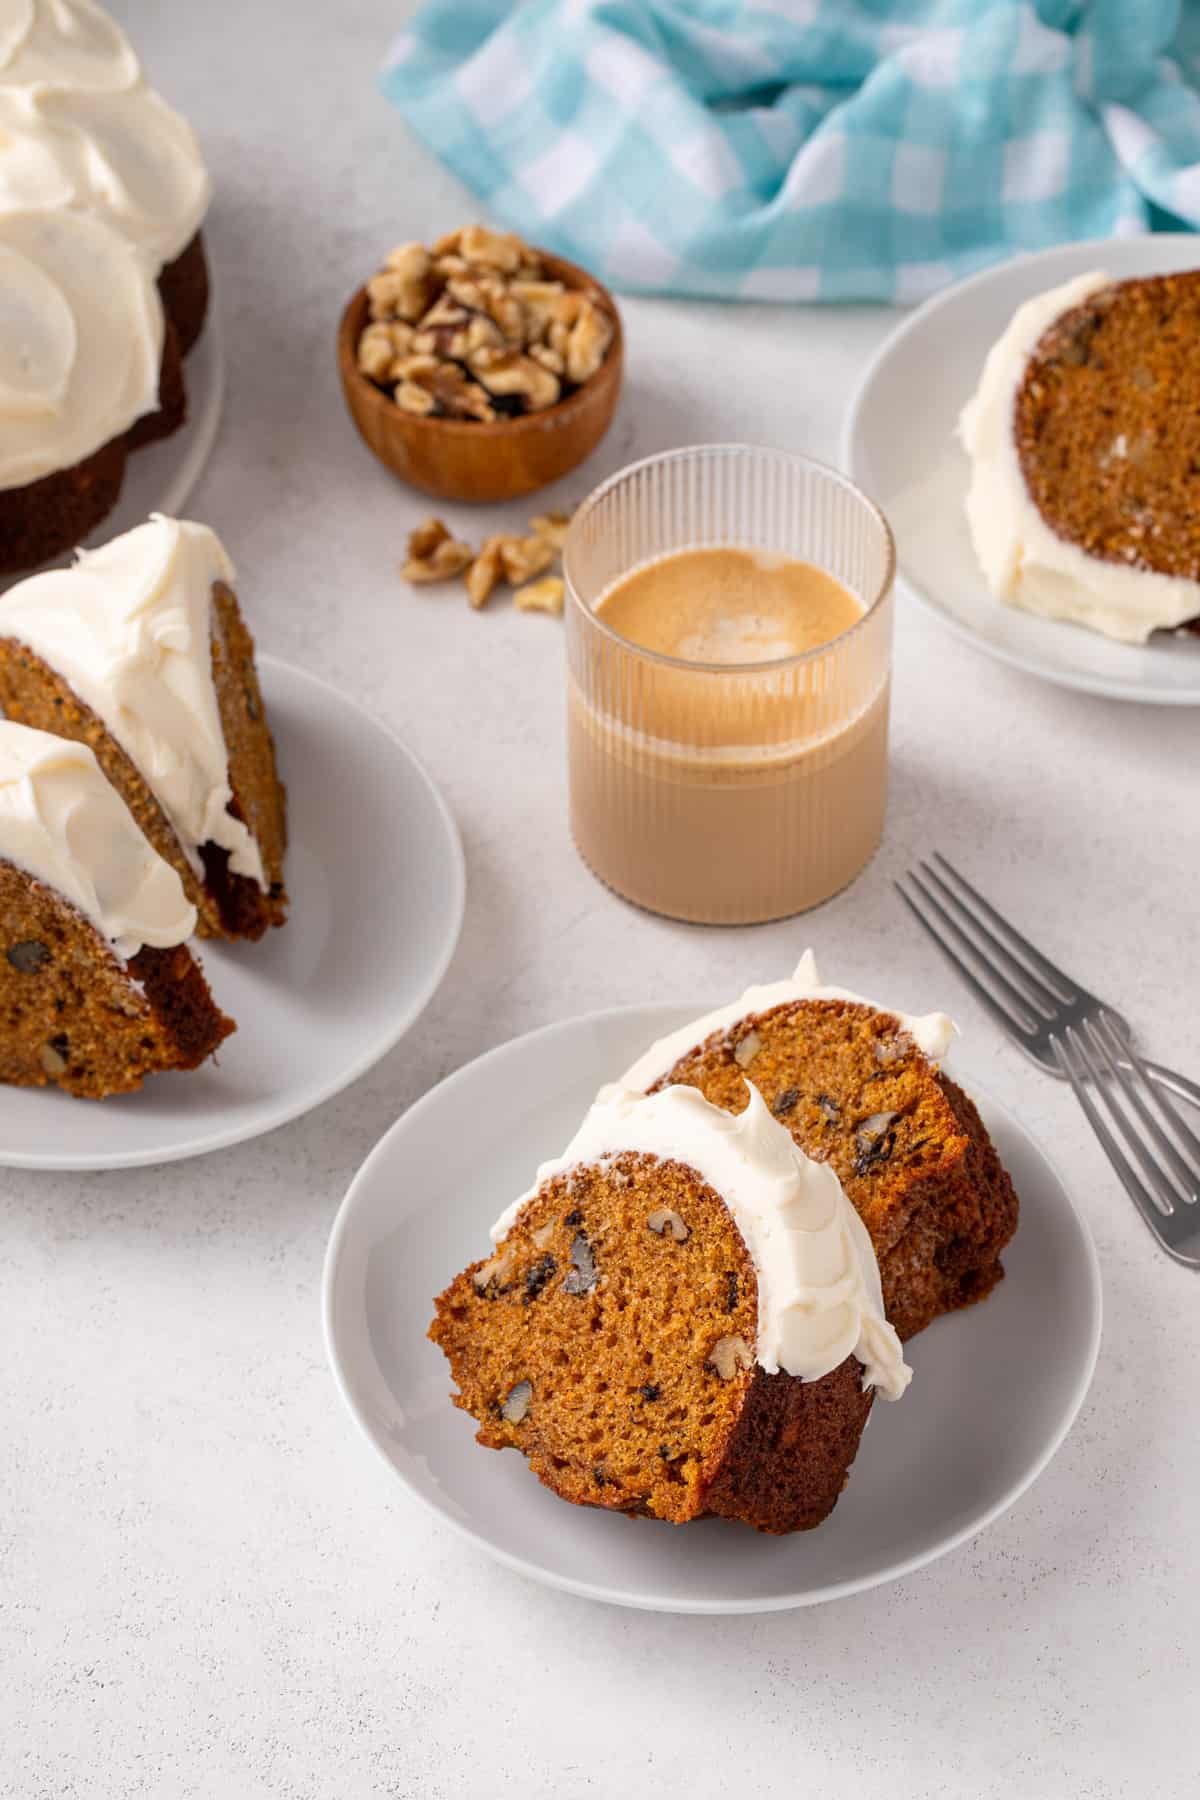 Two plates, each holding two slices of frosted carrot bundt cake, with more cake and iced coffee in the background.